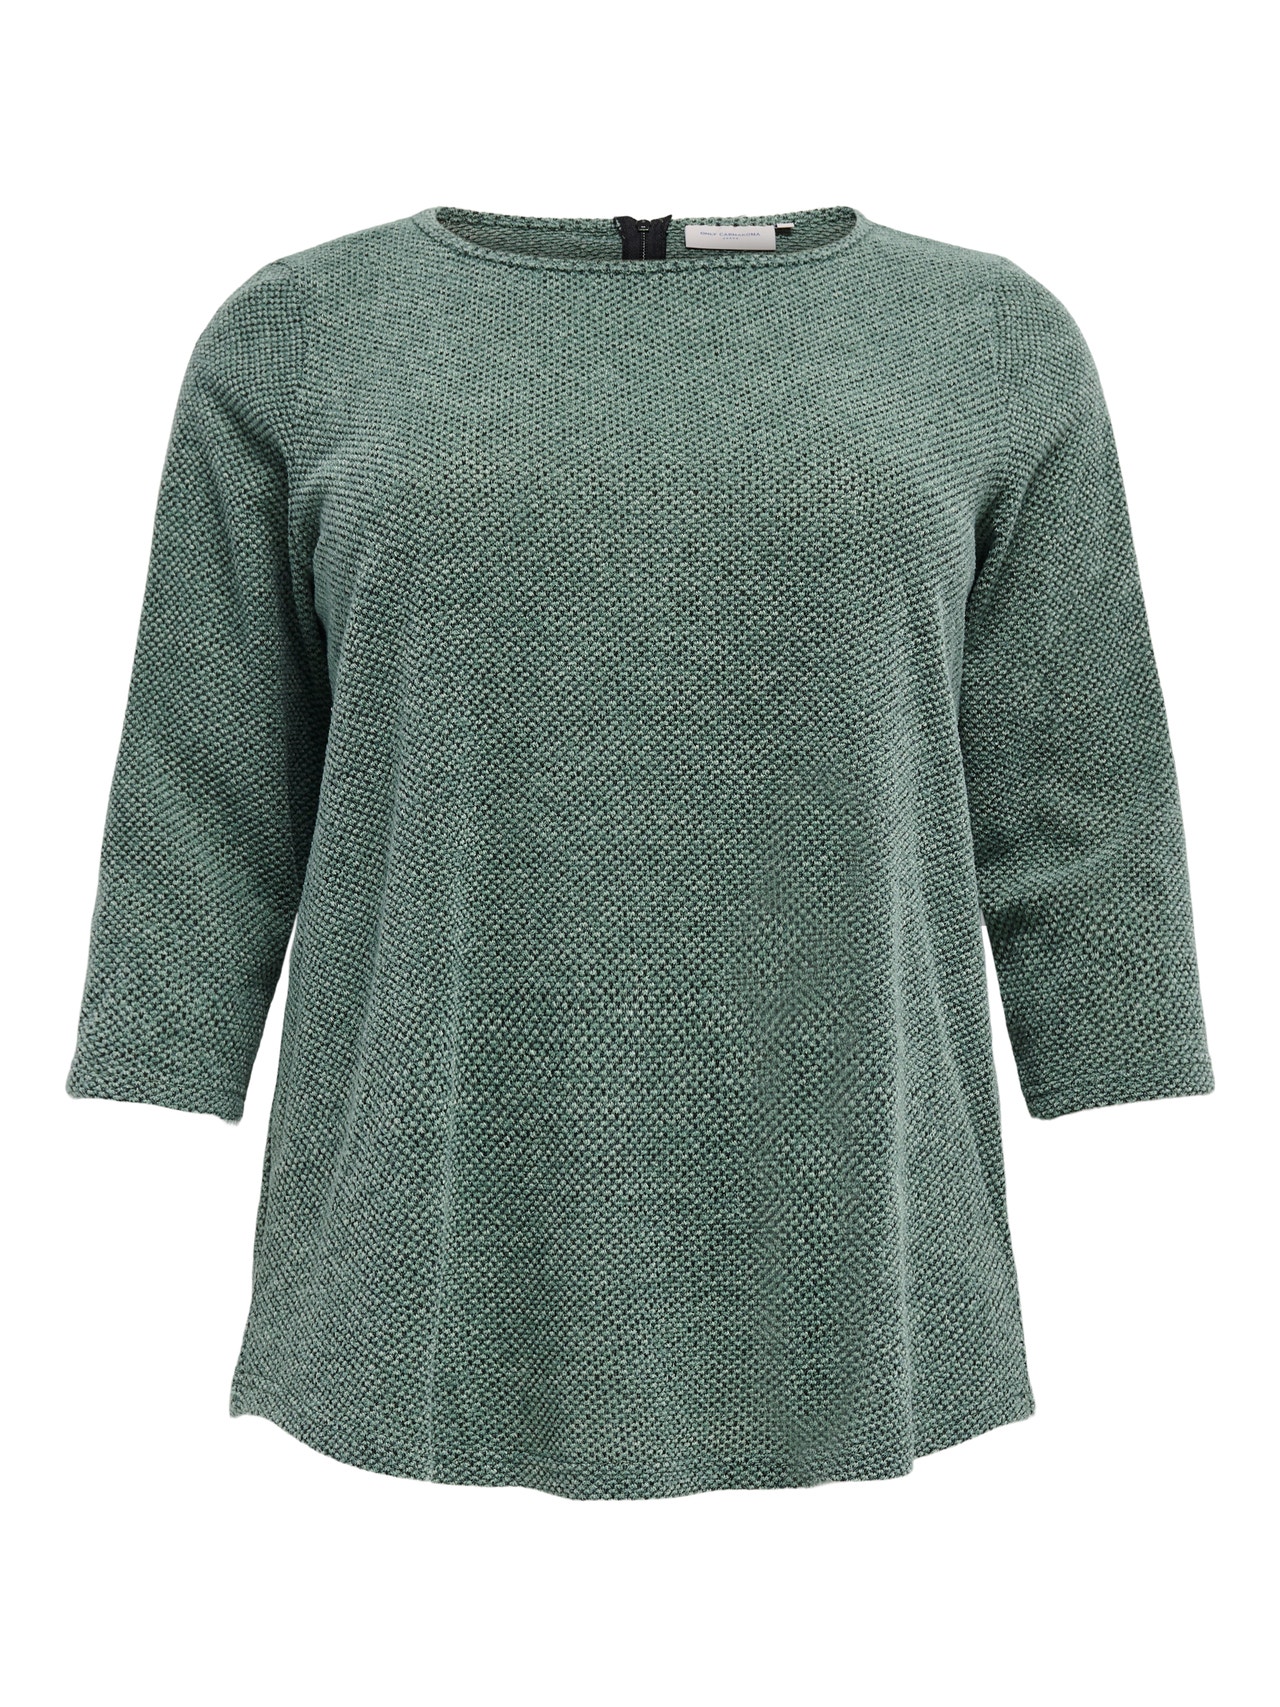 ONLY Tops Loose Fit Col bateau -Green Bay - 15196518